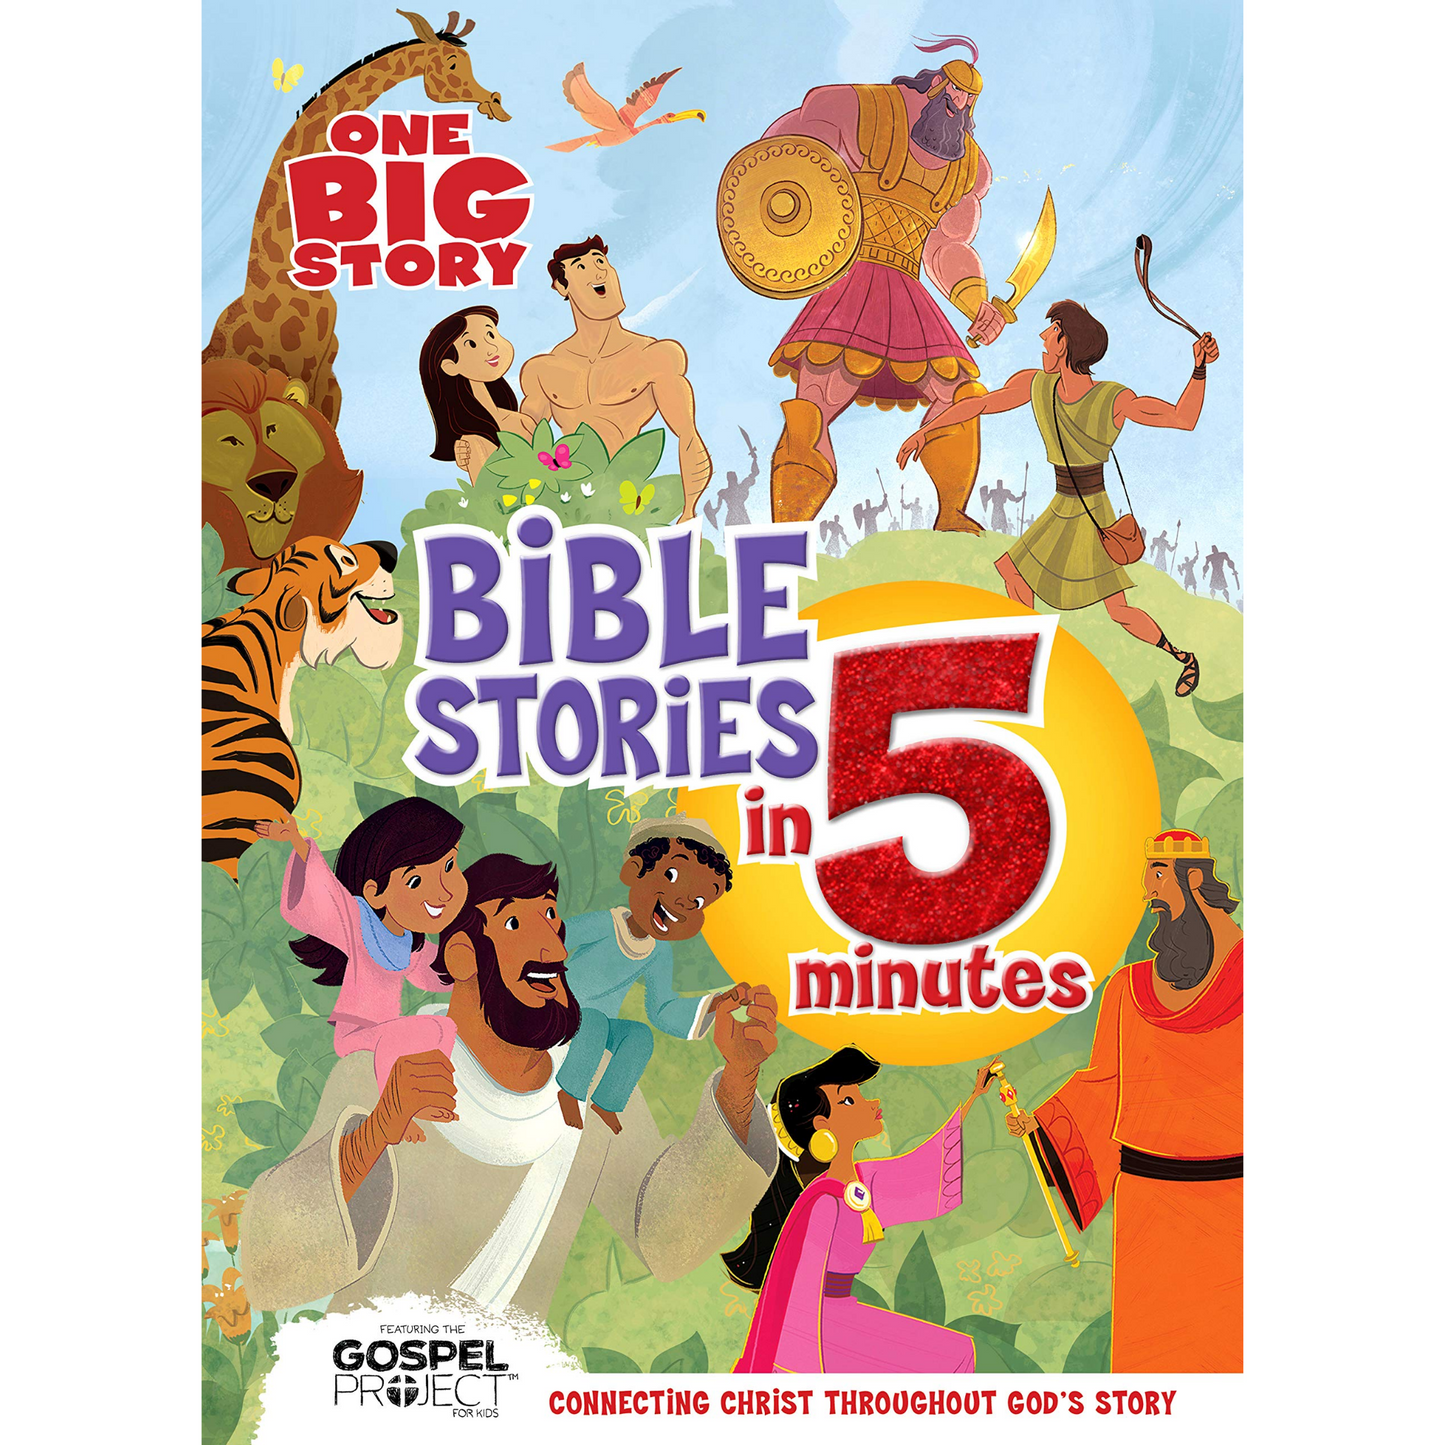 One Big Story Bible Stories in 5 Minutes (padded)